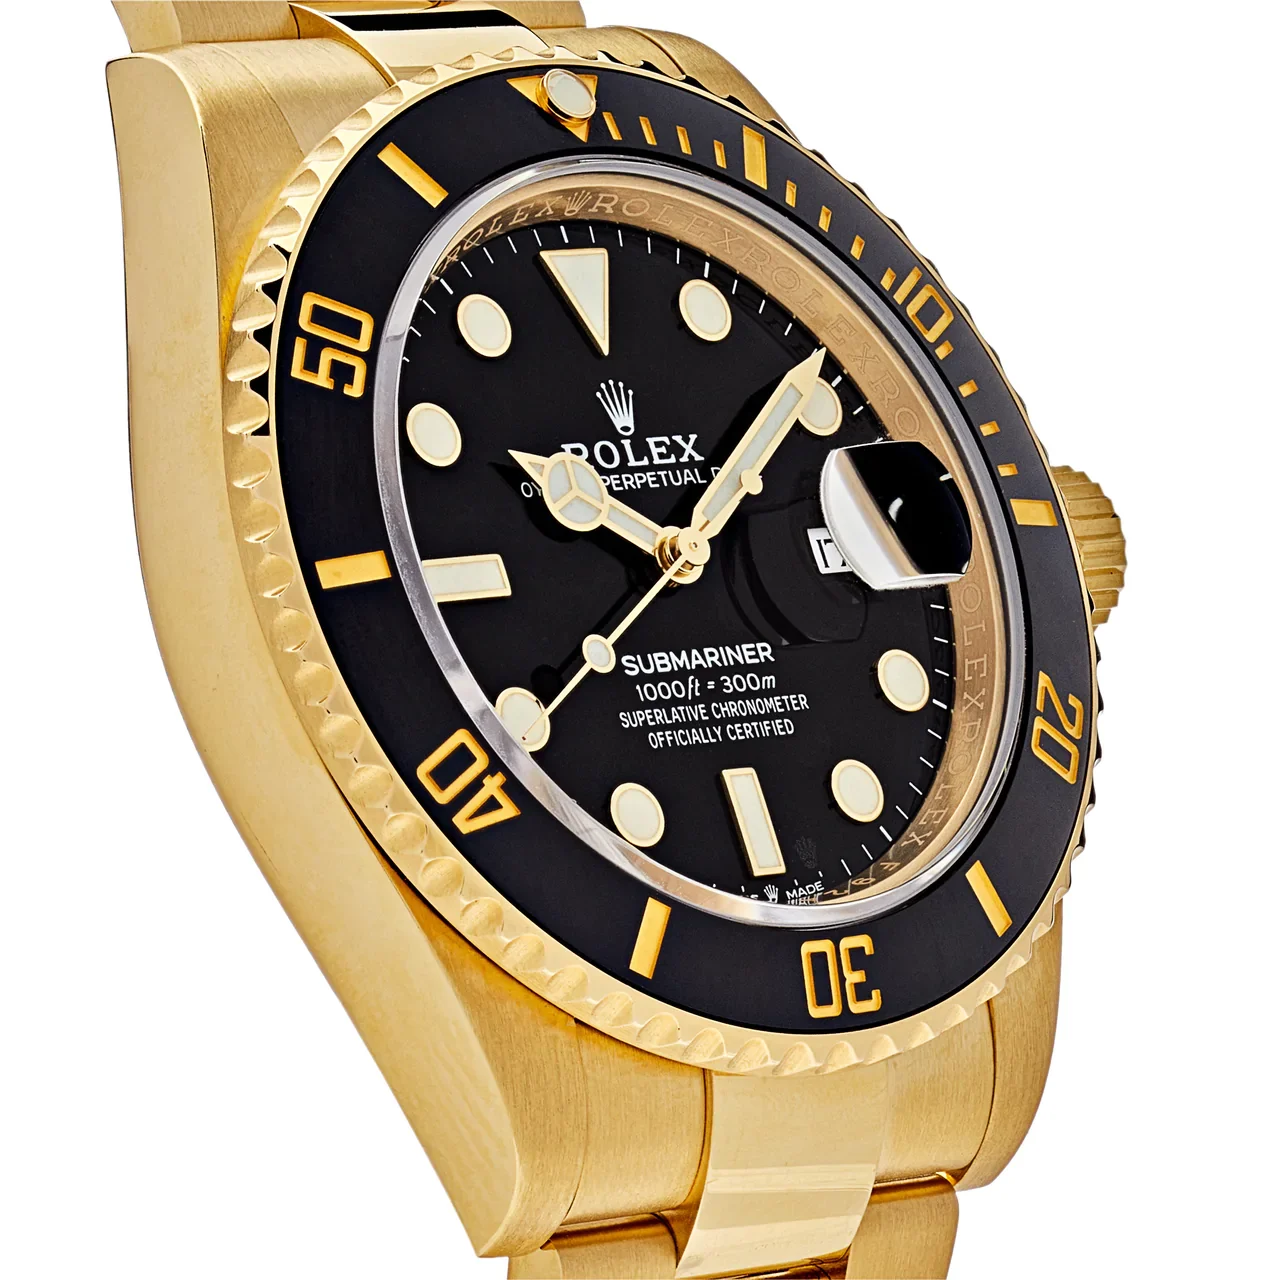 2021 Rolex Submariner Date Yellow Gold / Black 126618LN-0002 Listing Image 3